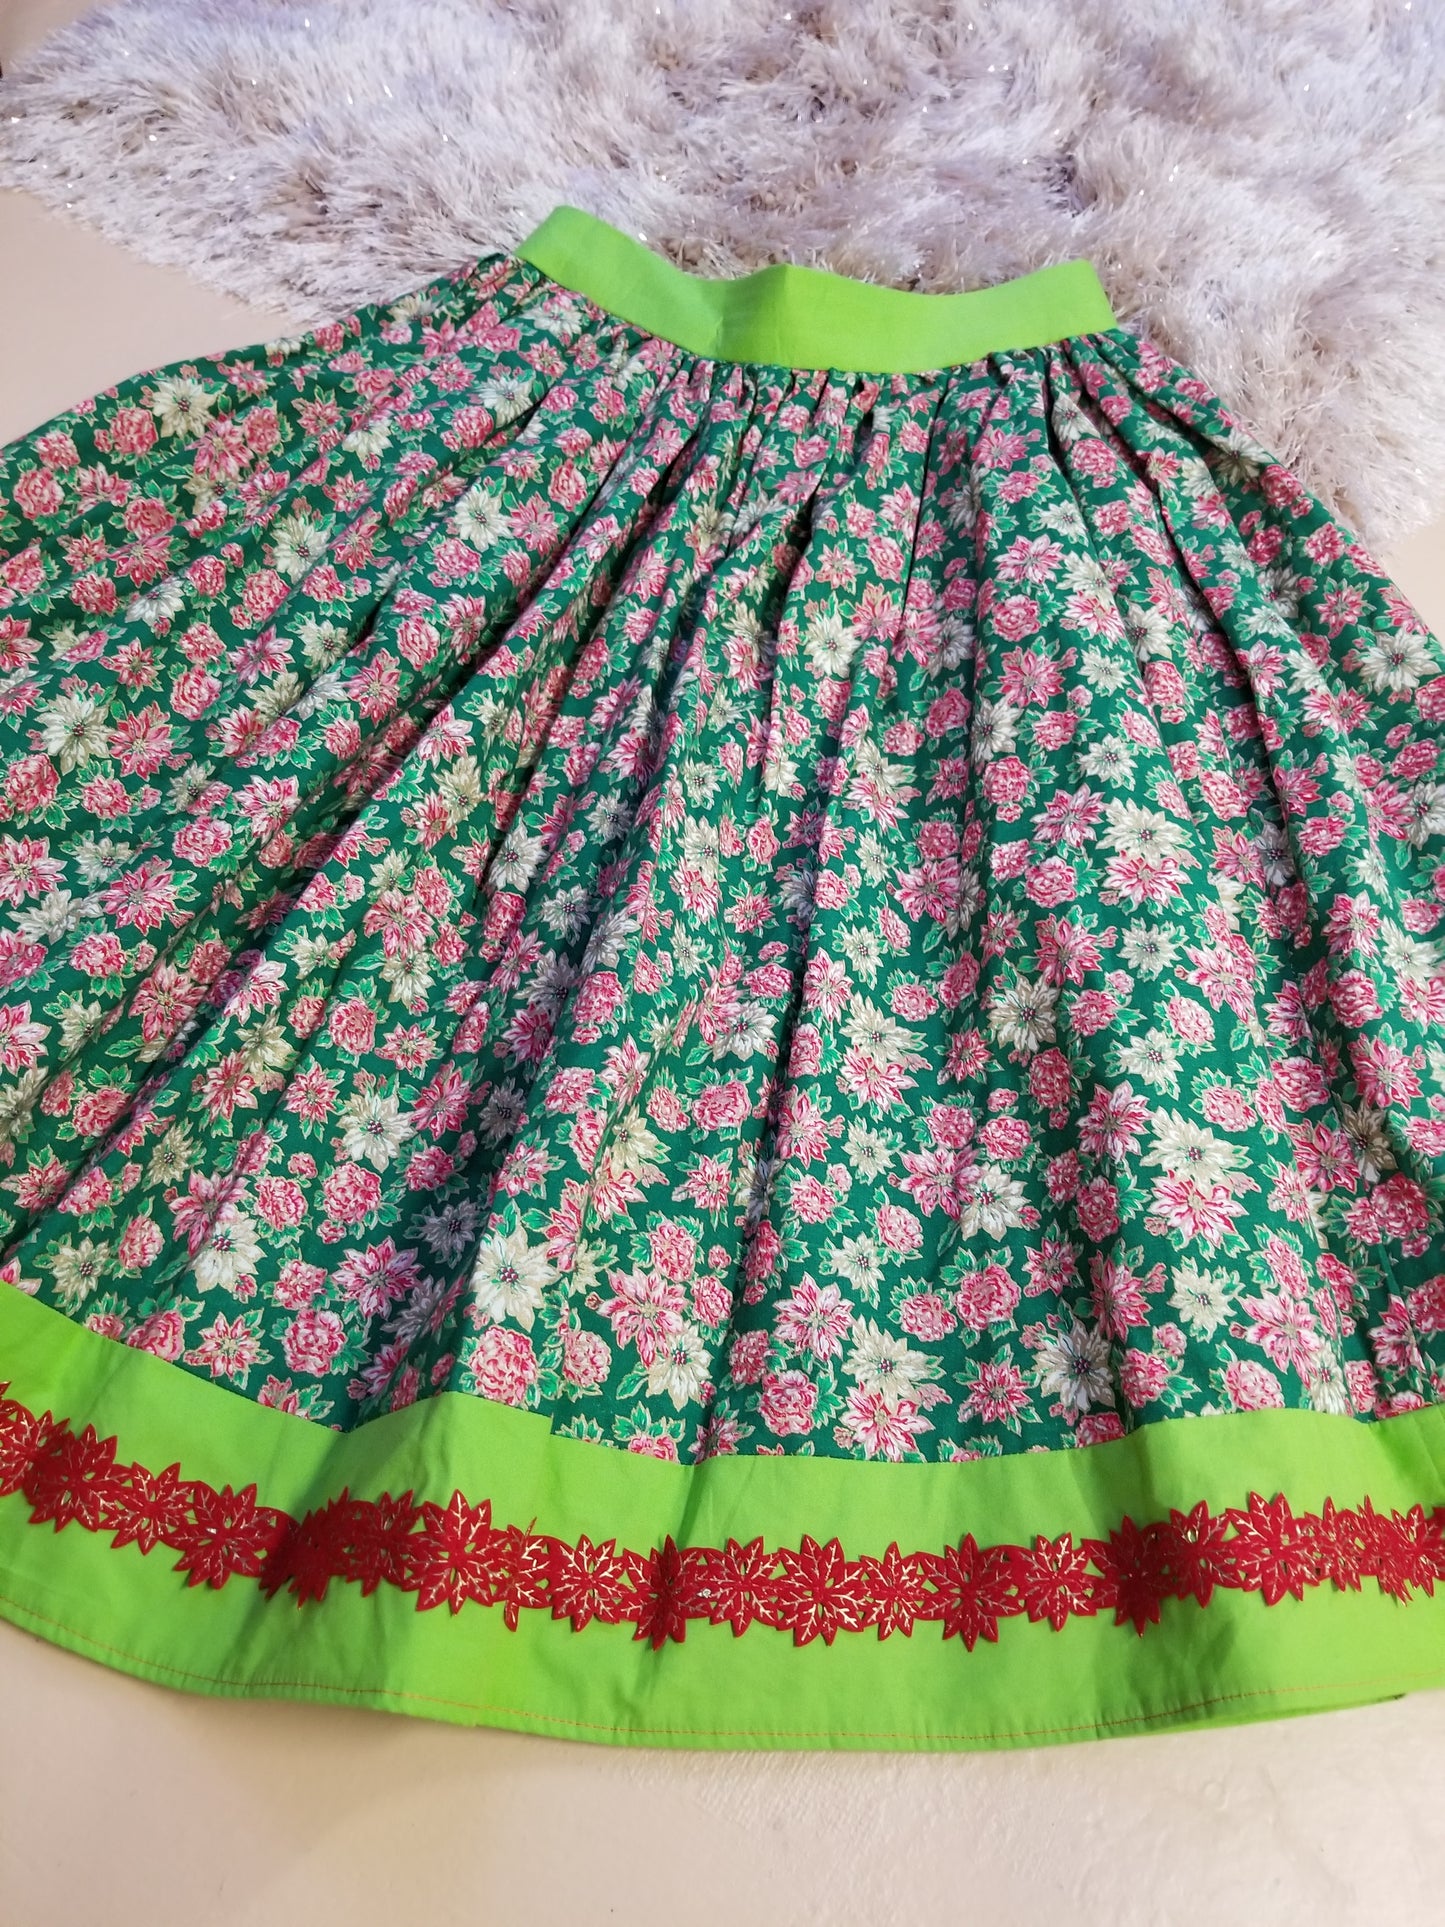 Poinsettia Holiday Skirt by PMdesigns by Pamela Marie